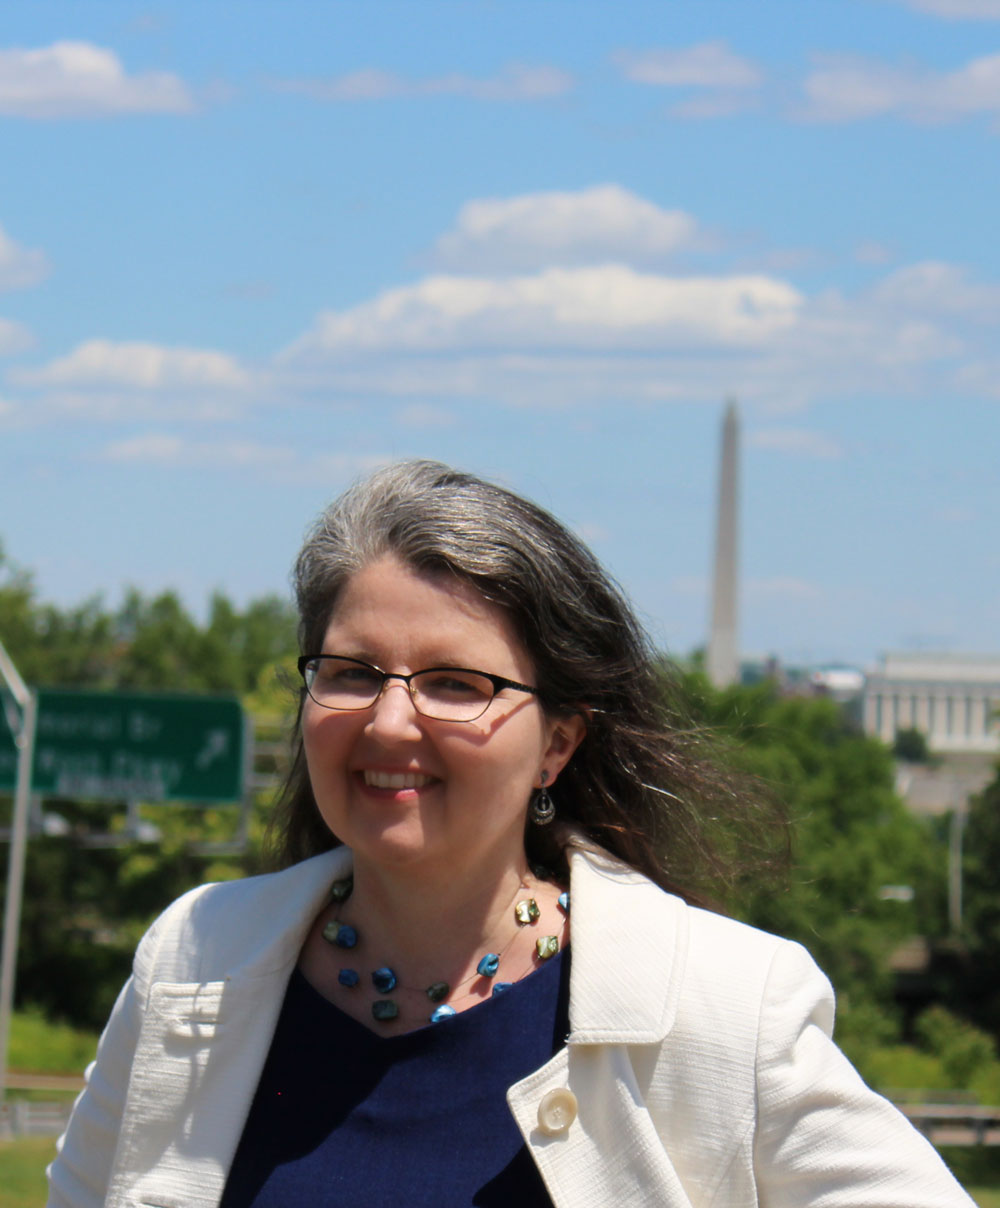 Susan Cunningham, Candidate for Arlington County Board